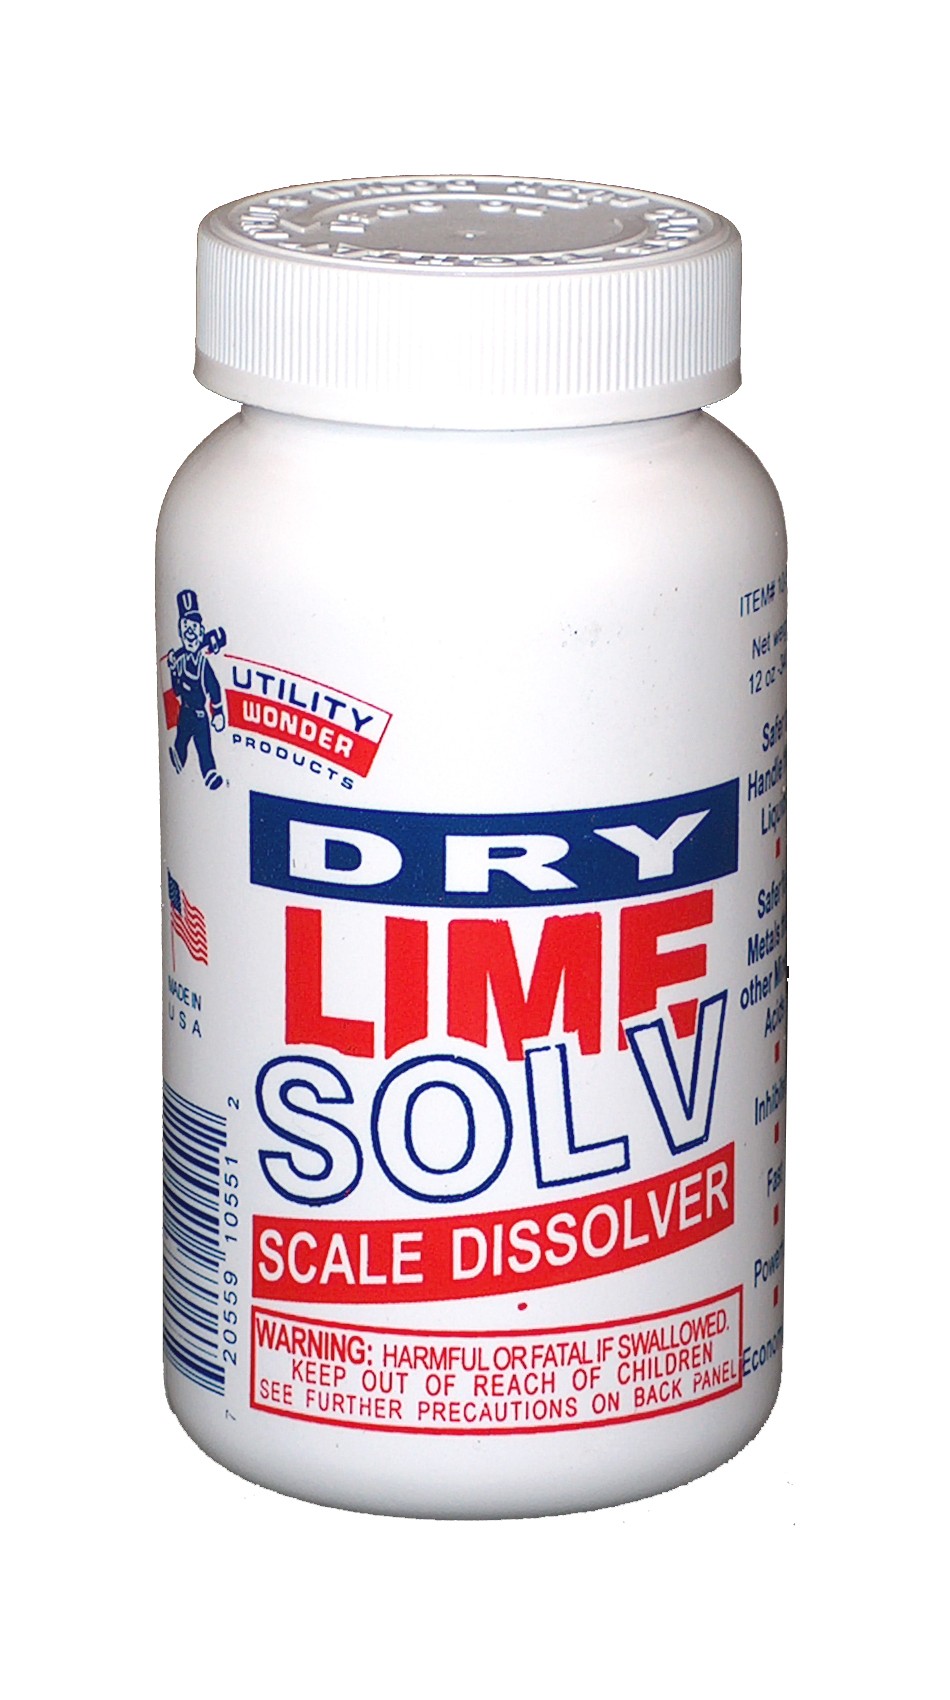 DRY LIME SOLV SCALE DISSOLVER